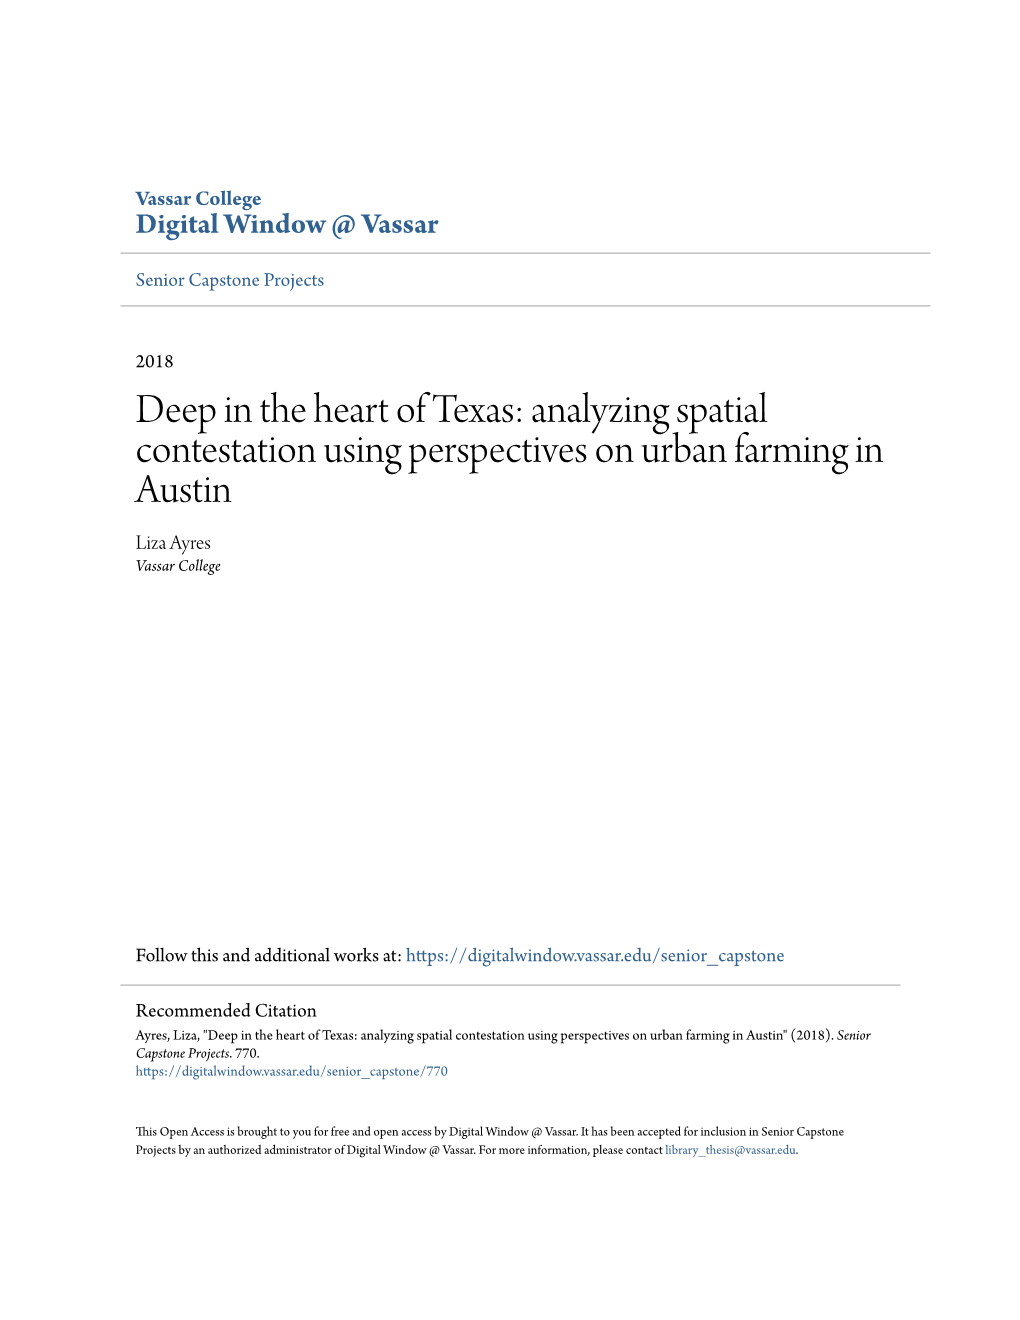 Analyzing Spatial Contestation Using Perspectives on Urban Farming in Austin Liza Ayres Vassar College